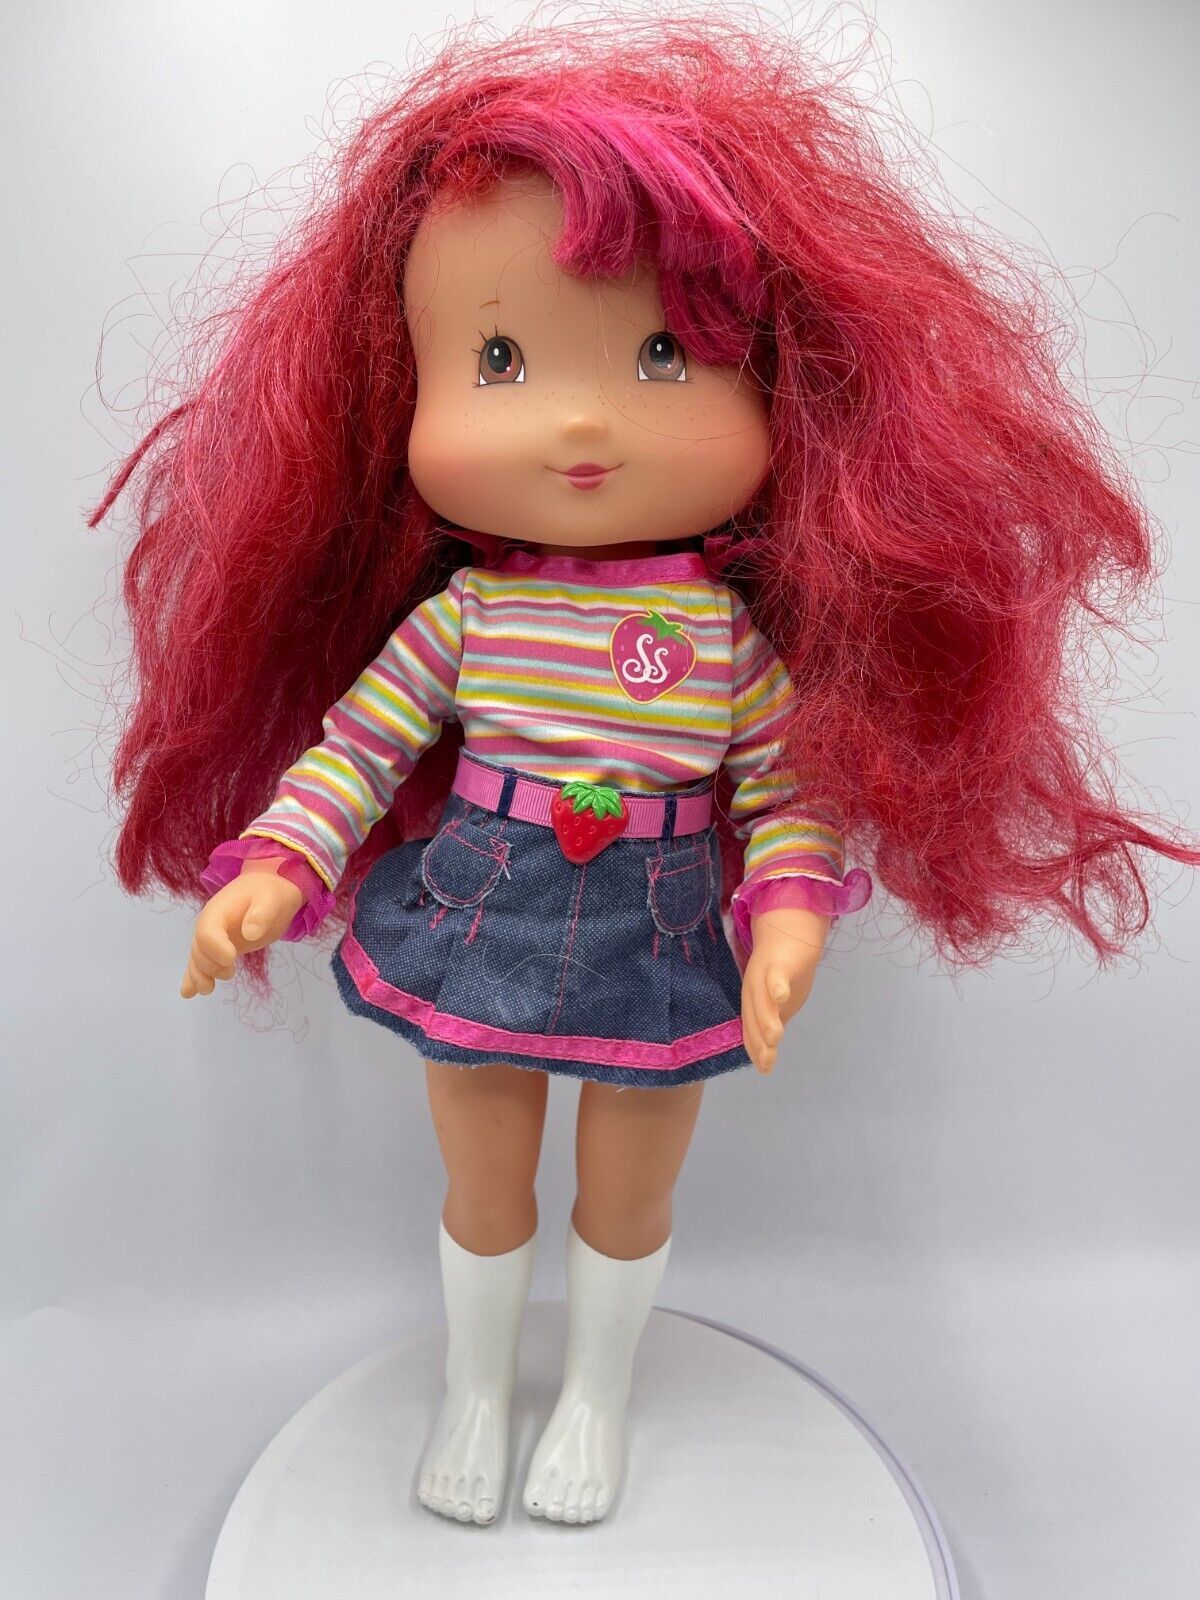 Strawberry Shortcake A World Of Friends Playmates 2006 Play Date Pals Large 16" - $9.49